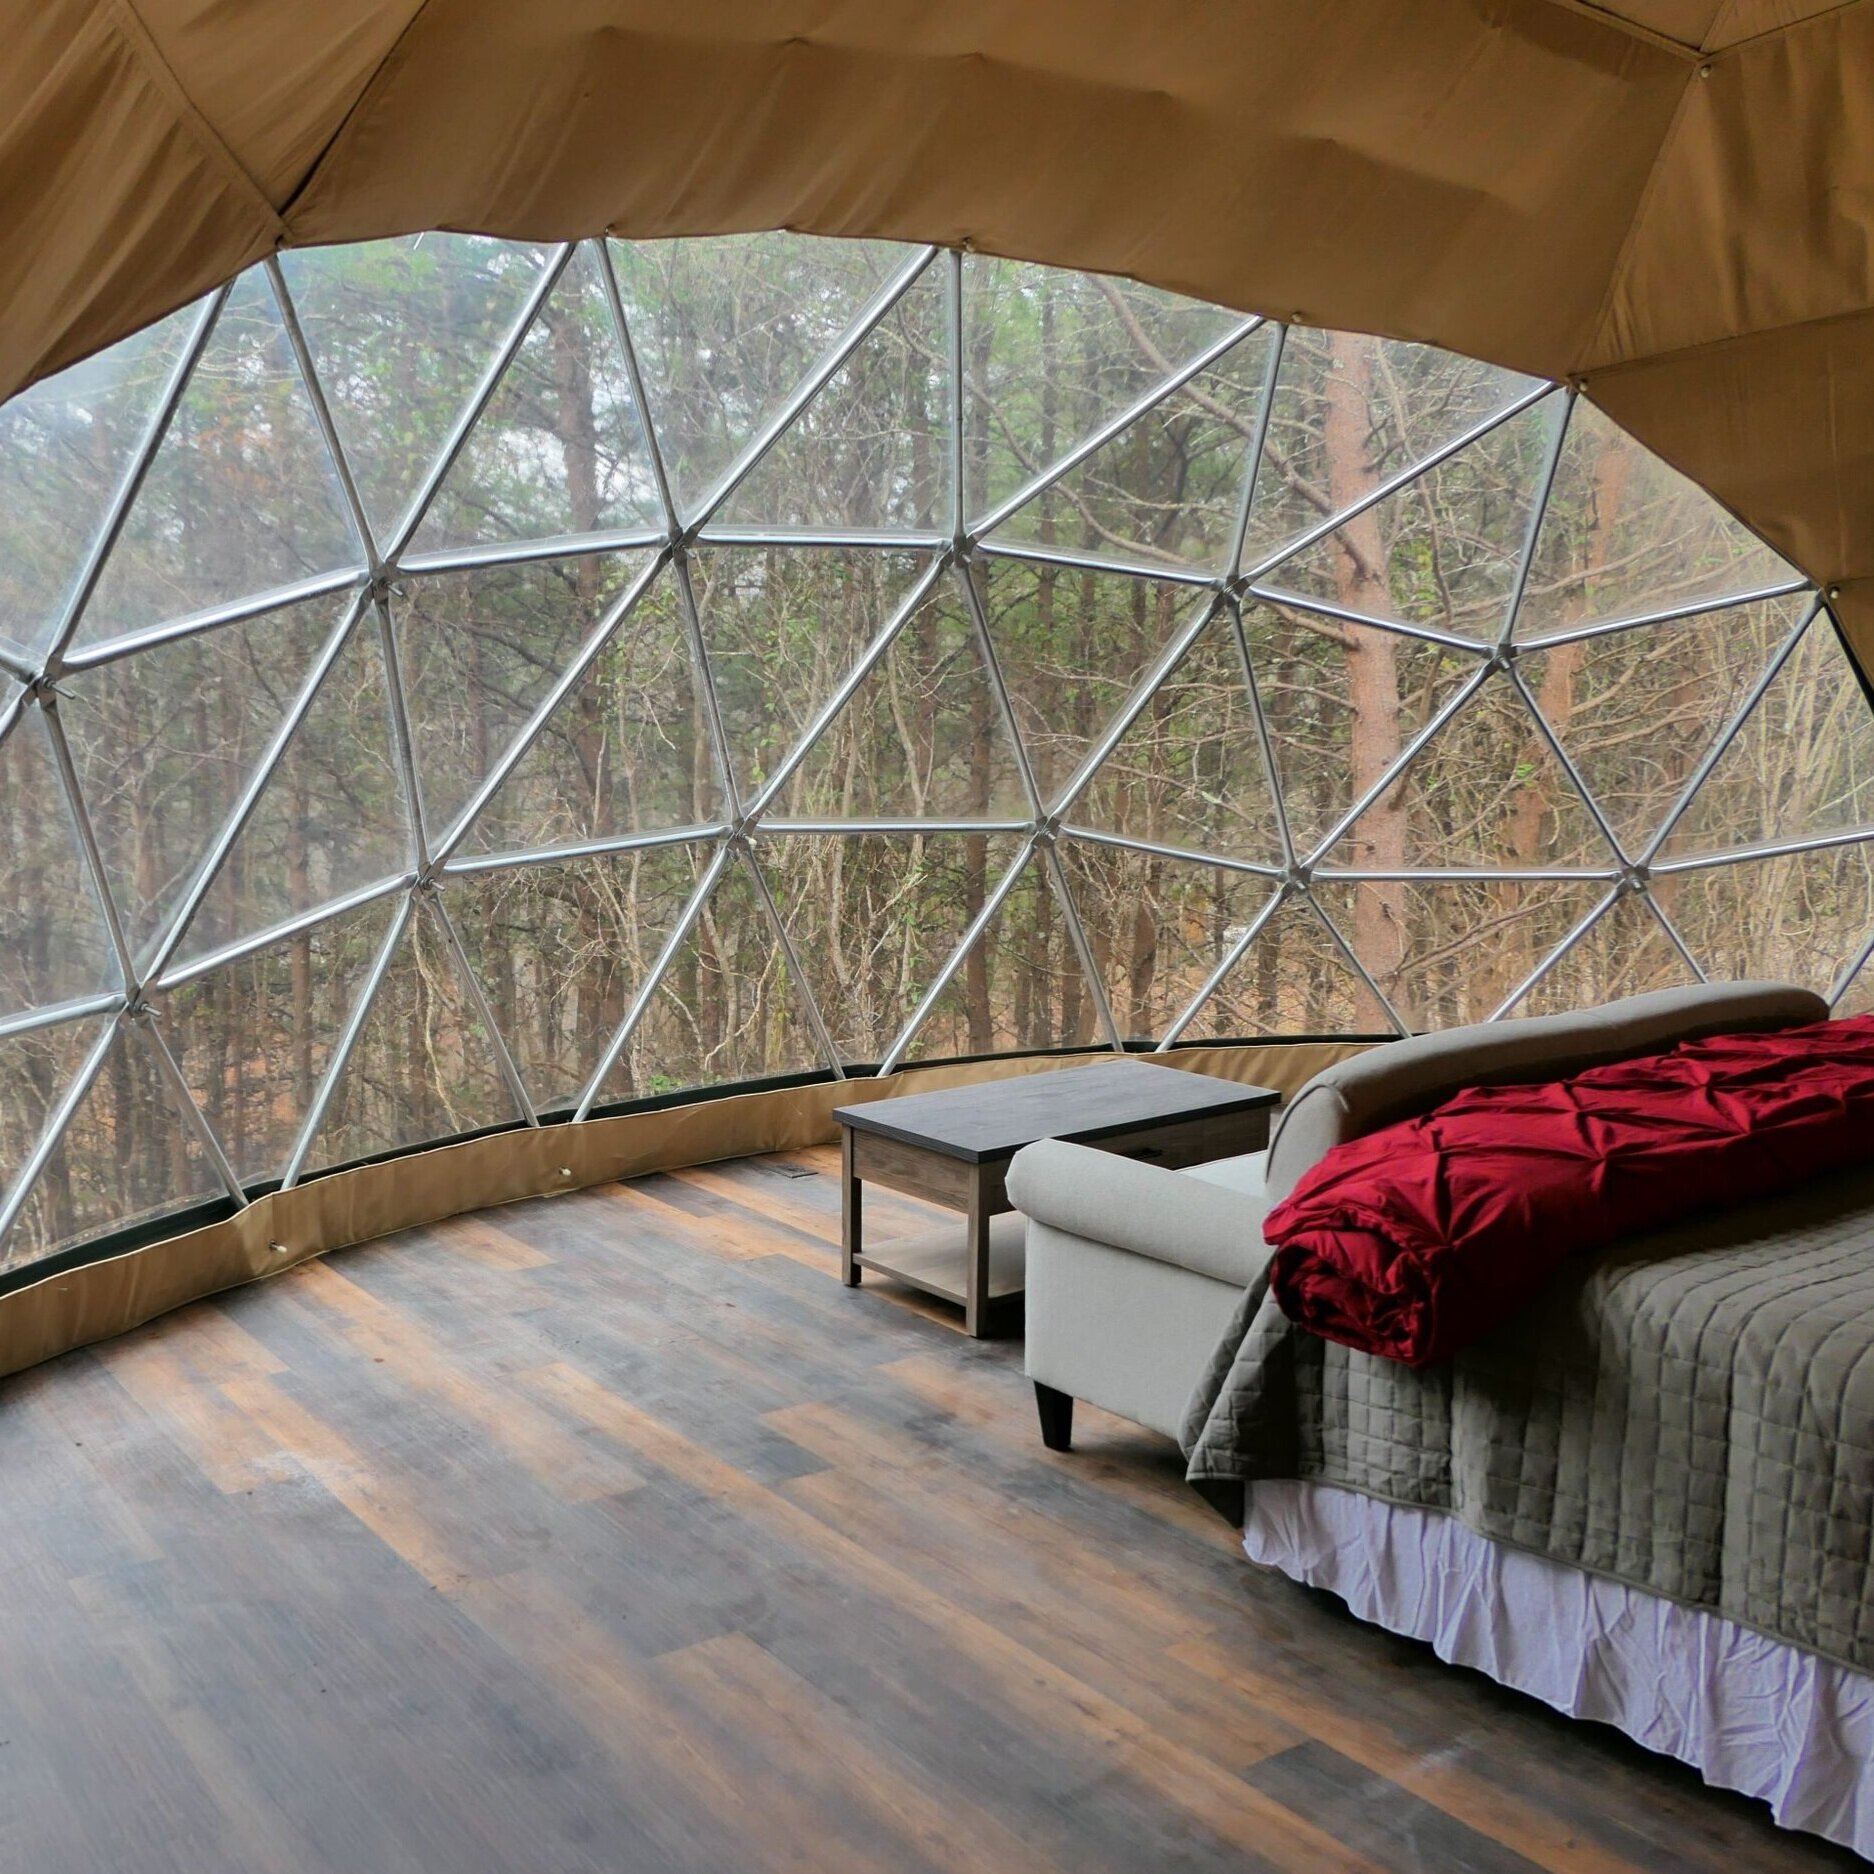 Rent this Cozy Geodome for your next Hocking Hills State Park Getaway